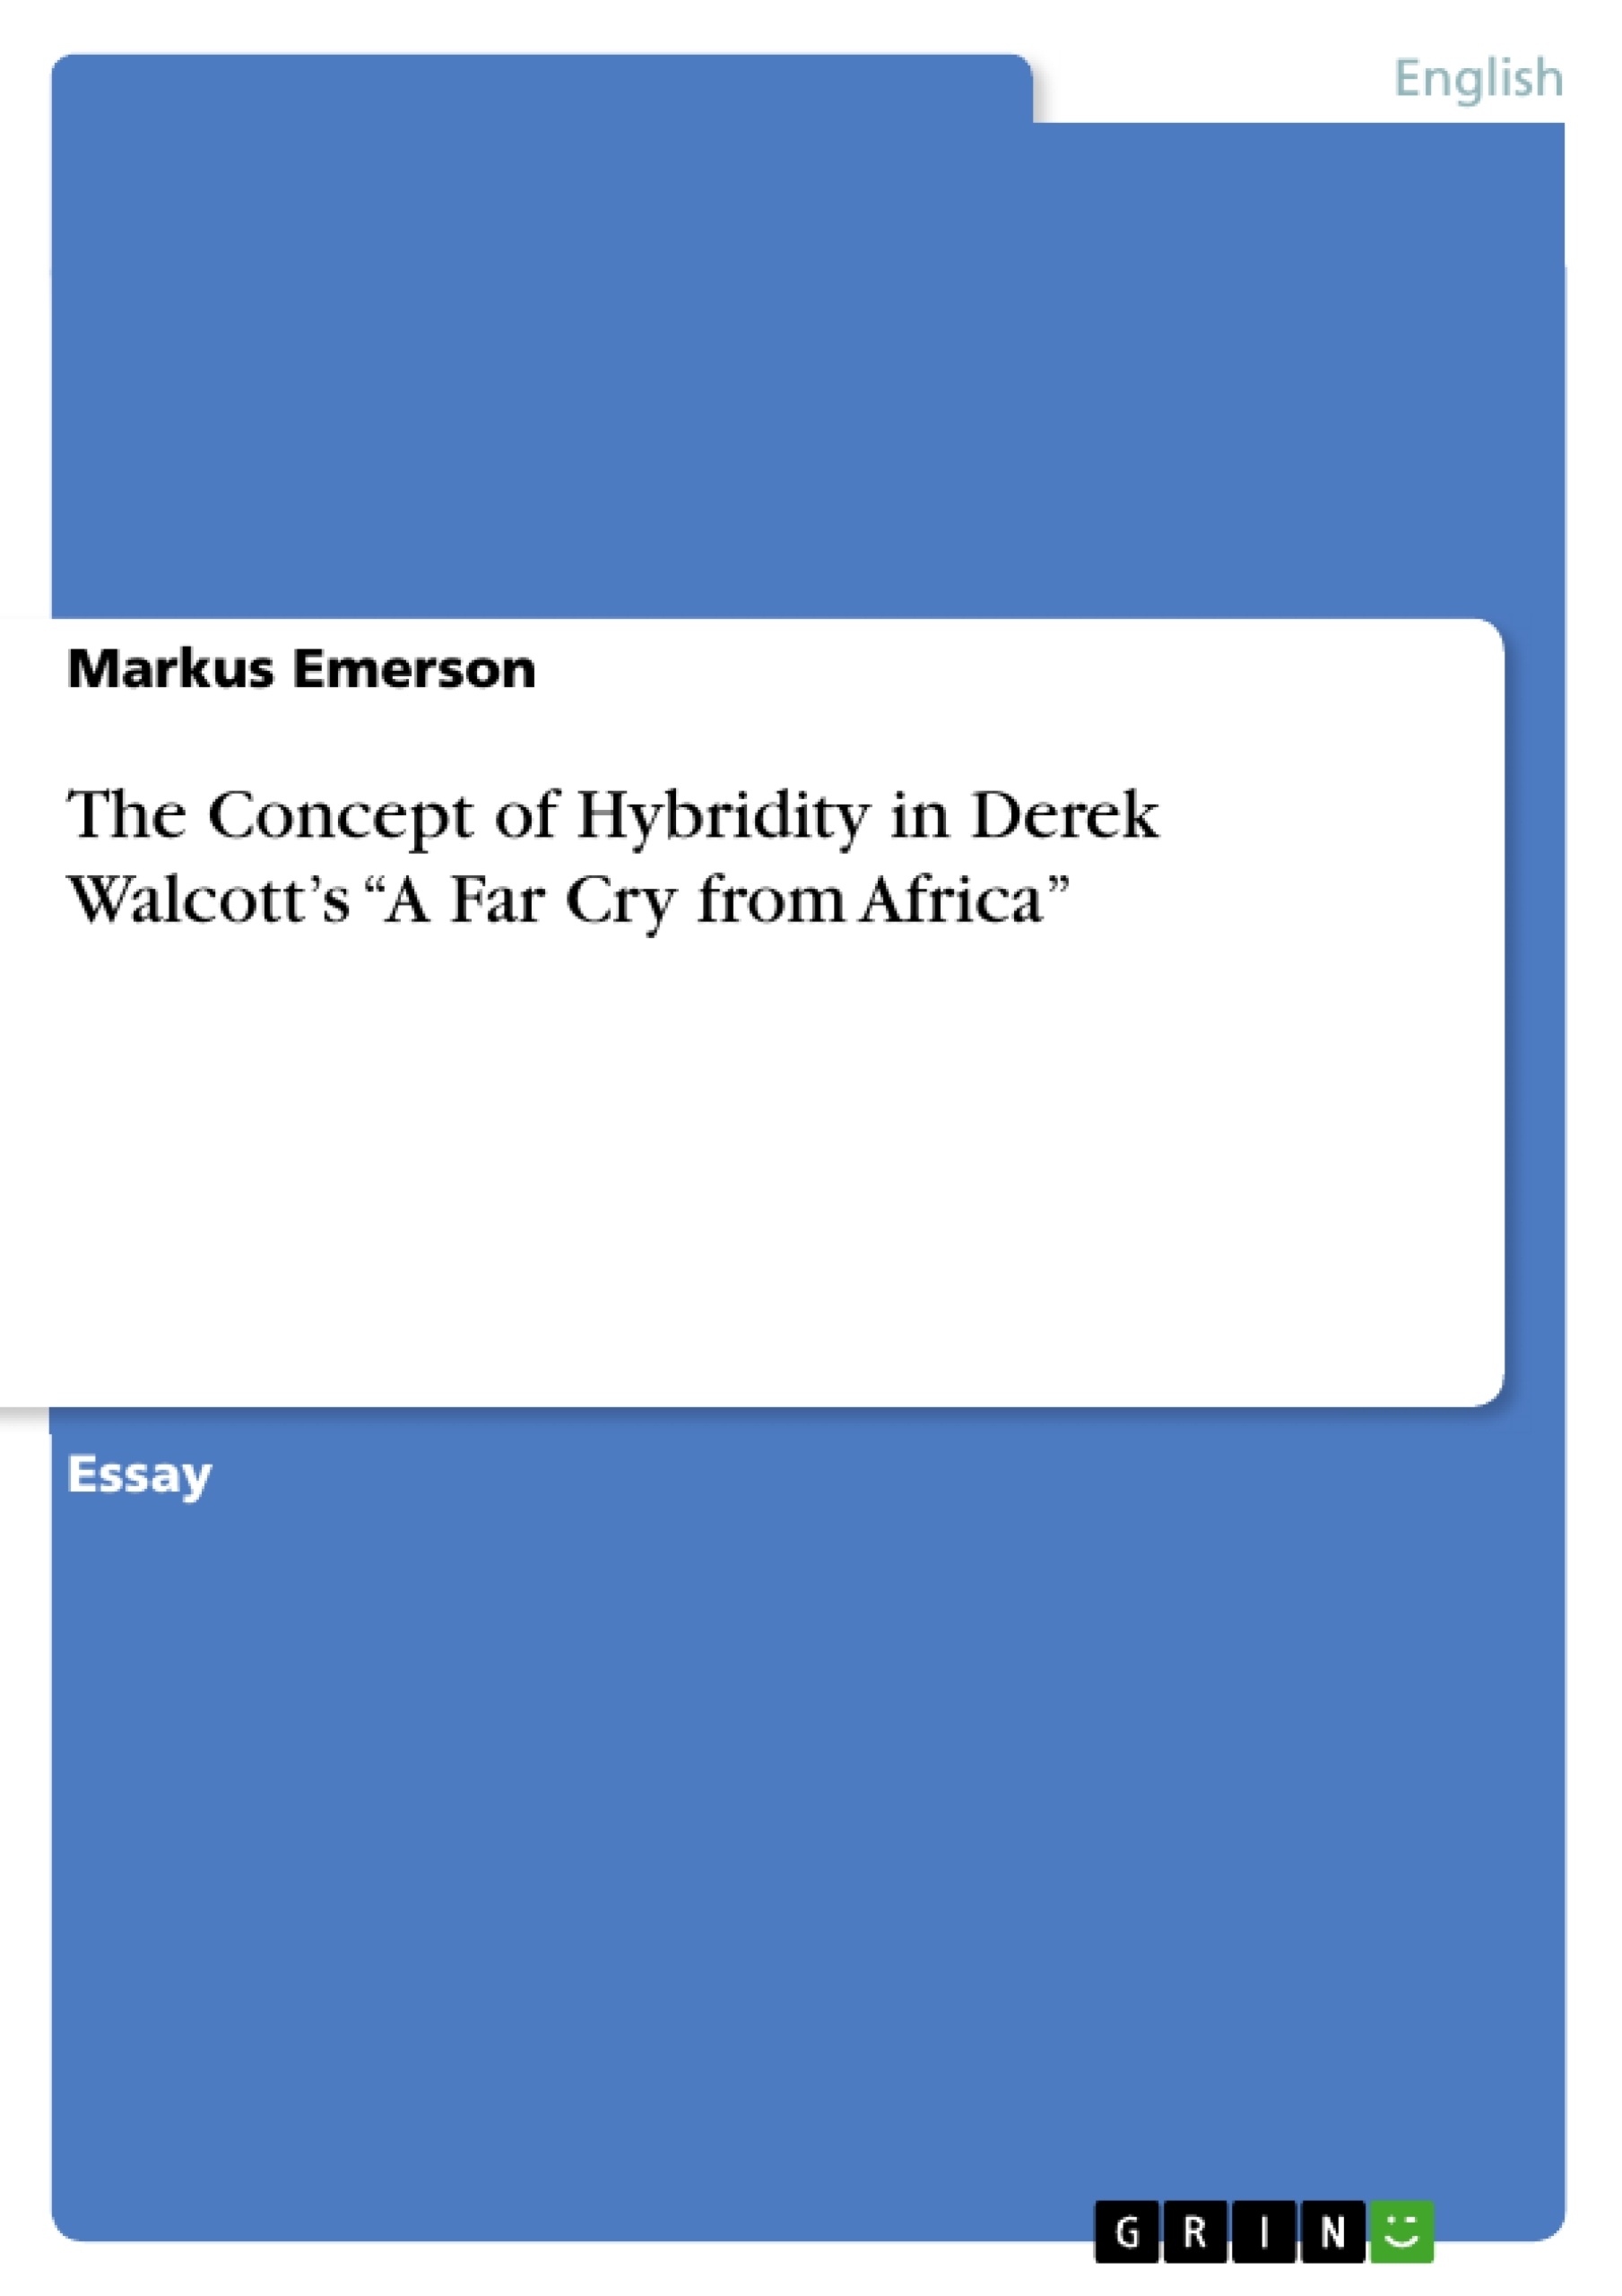 Title: The Concept of Hybridity in Derek Walcott’s “A Far Cry from Africa”